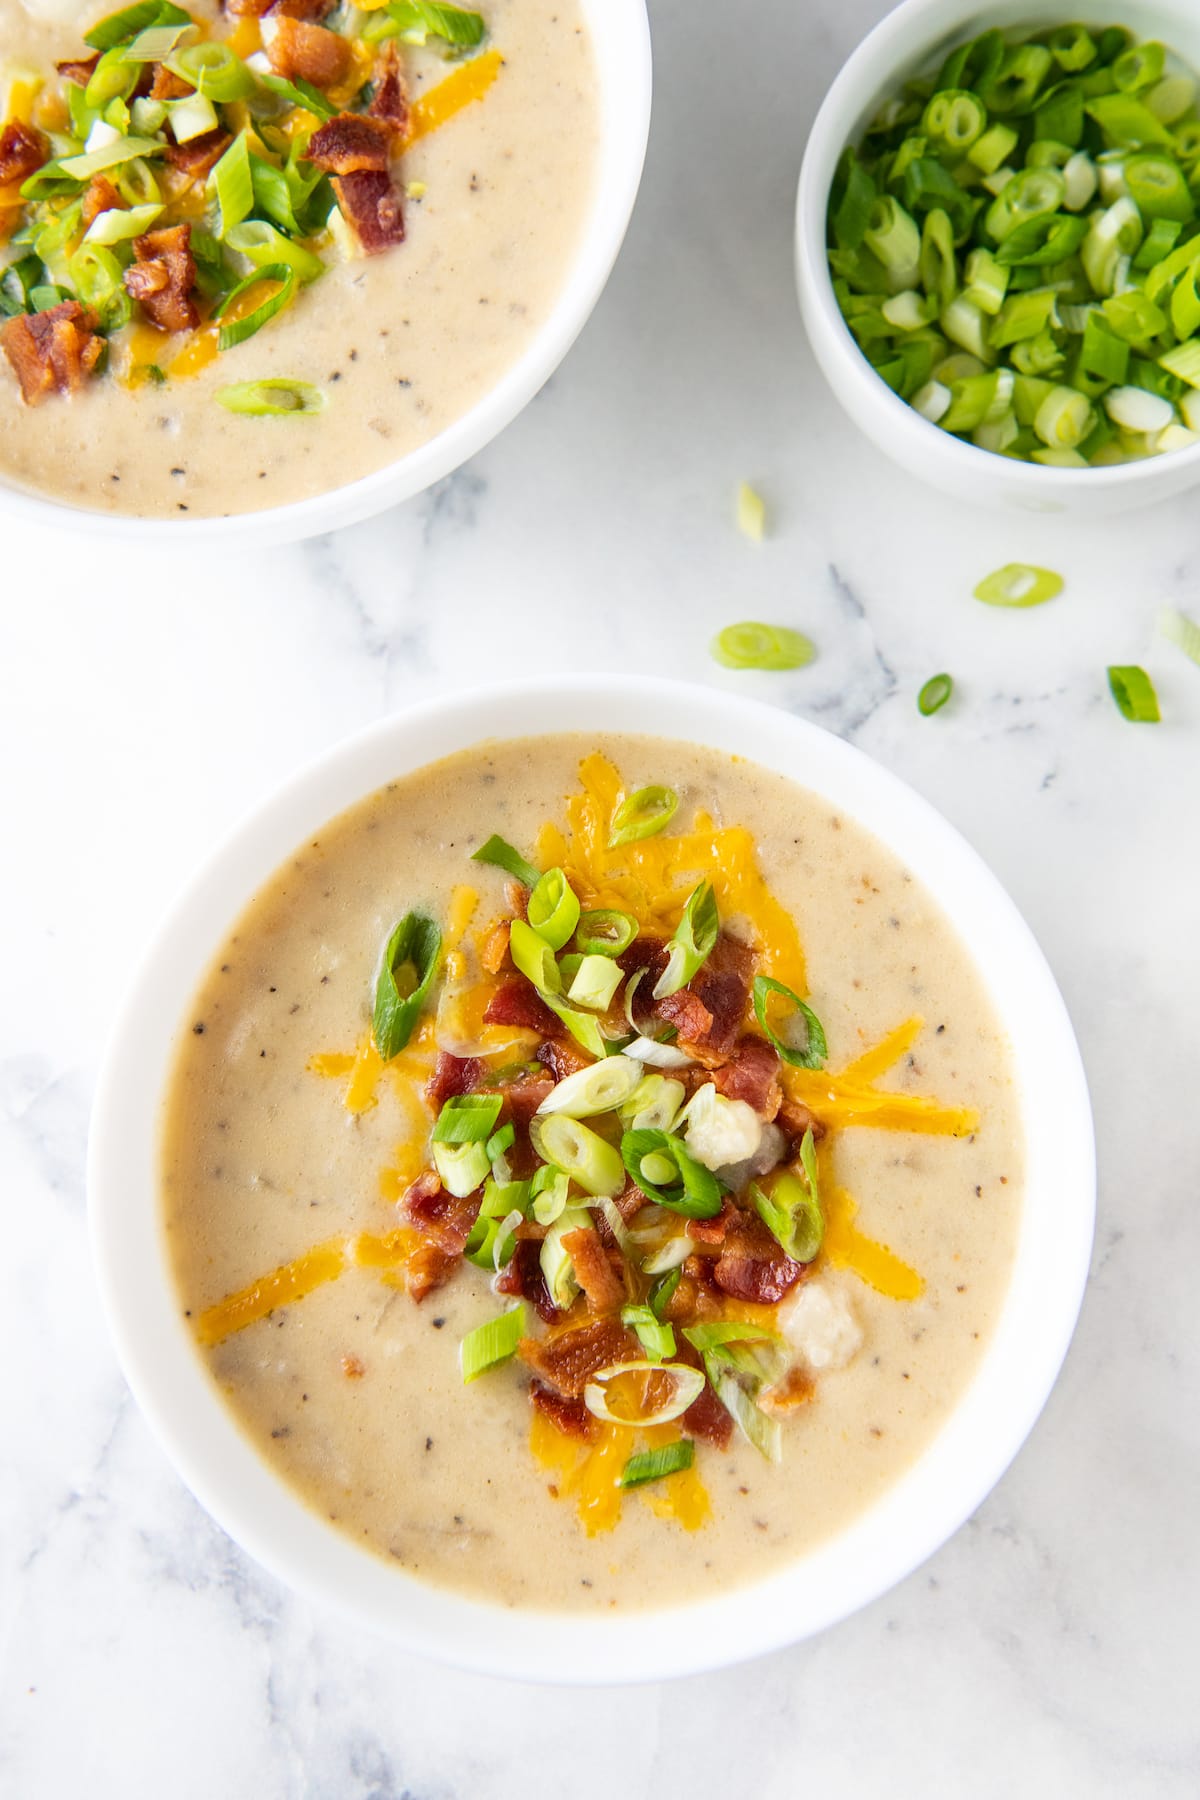 creamy potato soup with bacon, green onions, and cheese garnish